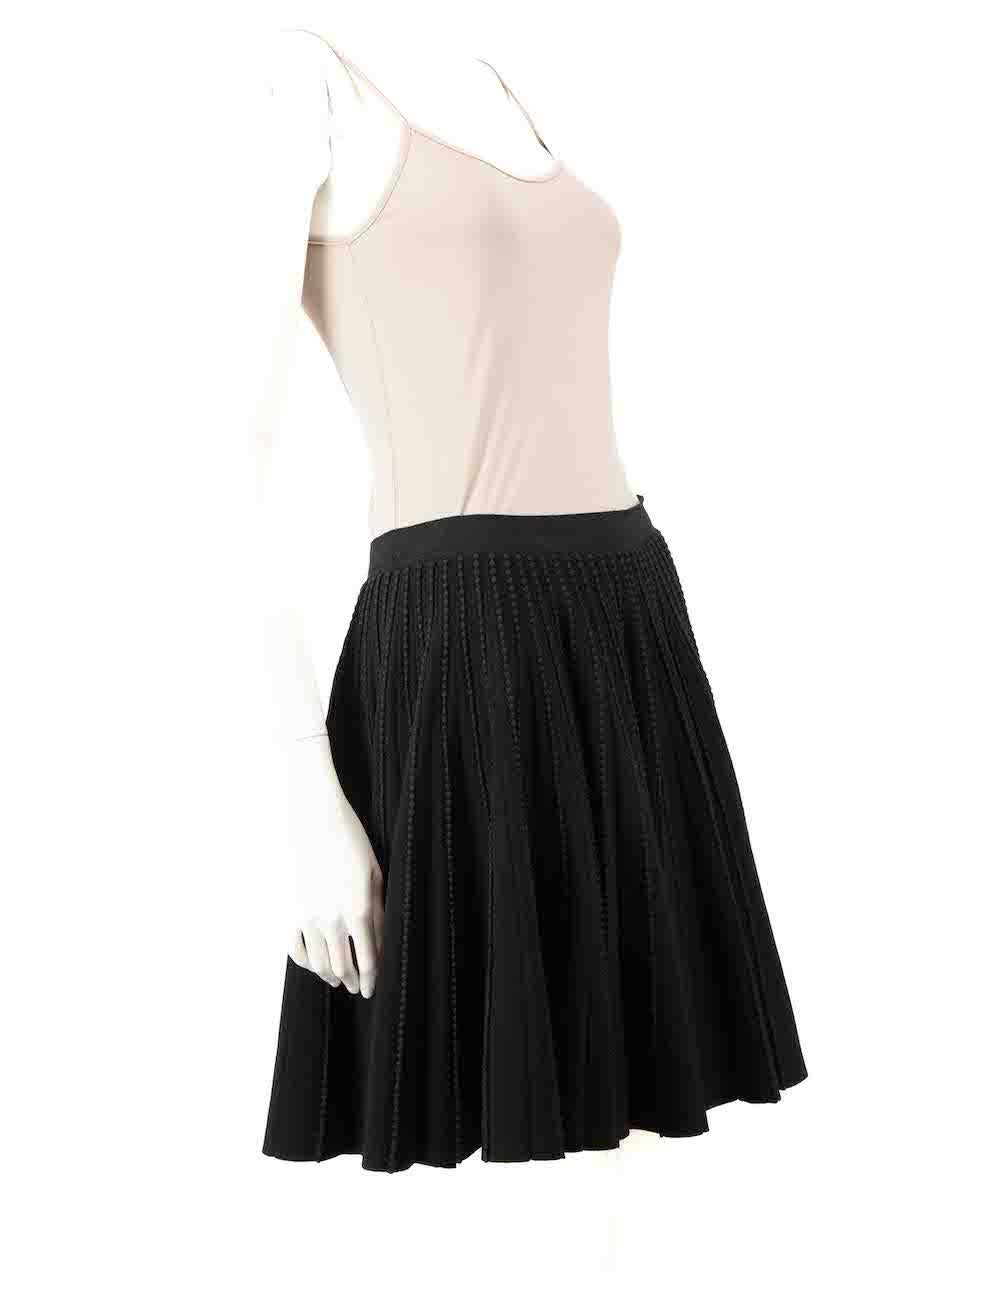 CONDITION is Very good. Minimal wear to skirt is evident. Minimal loose seam to rear internal waistband. Minimal pull thread to right side of waistband on this used Azzedine Alaïa designer resale item.
 
 
 
 Details
 
 
 Black
 
 Viscose
 
 Knit